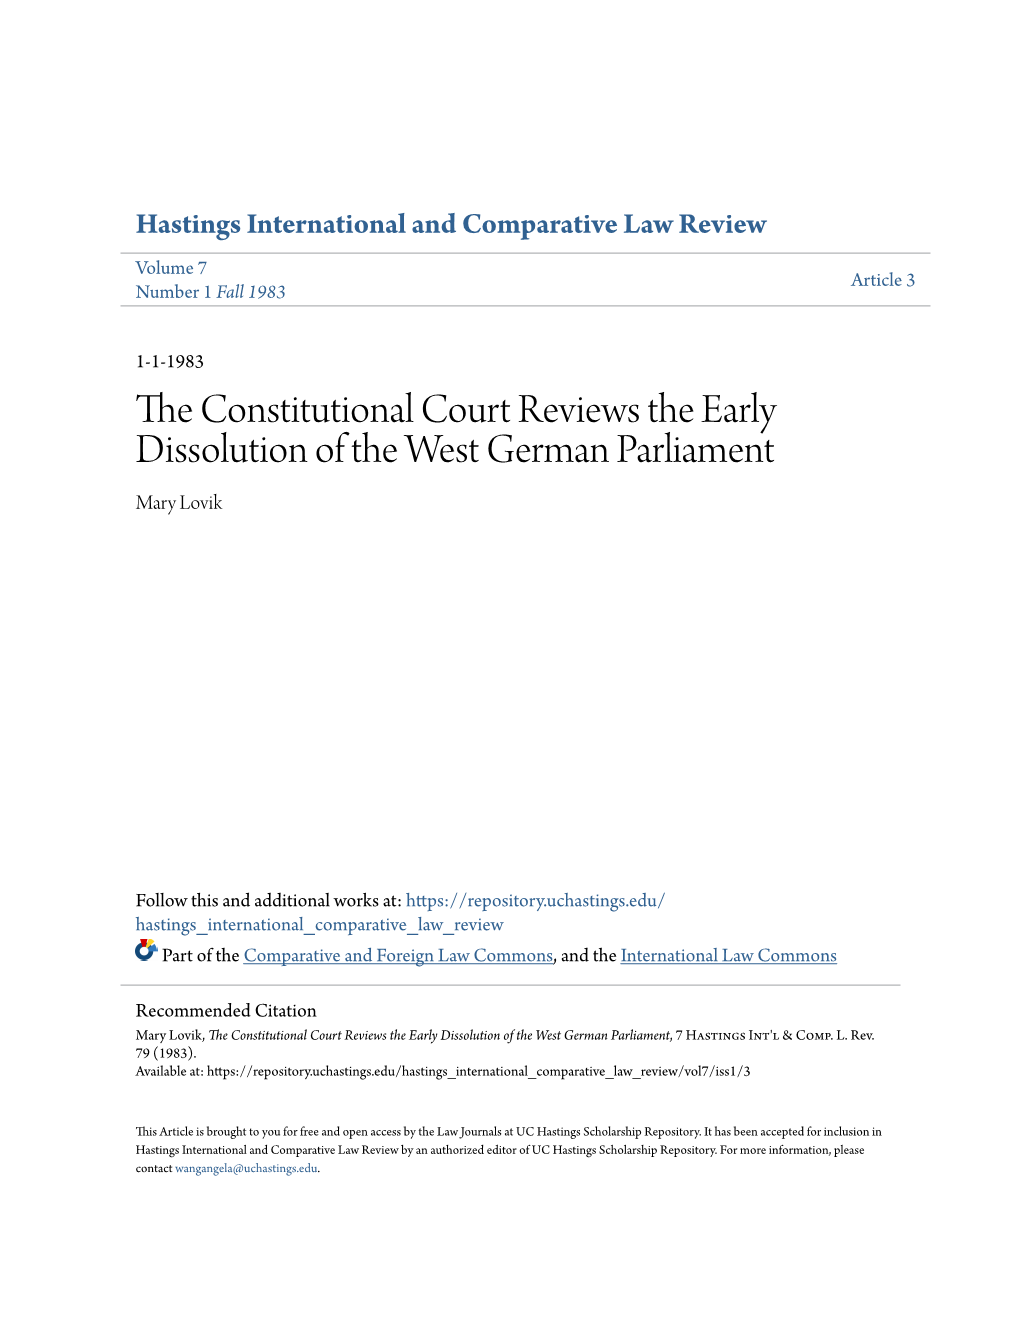 The Constitutional Court Reviews the Early Dissolution of the West German Parliament, 7 Hastings Int'l & Comp